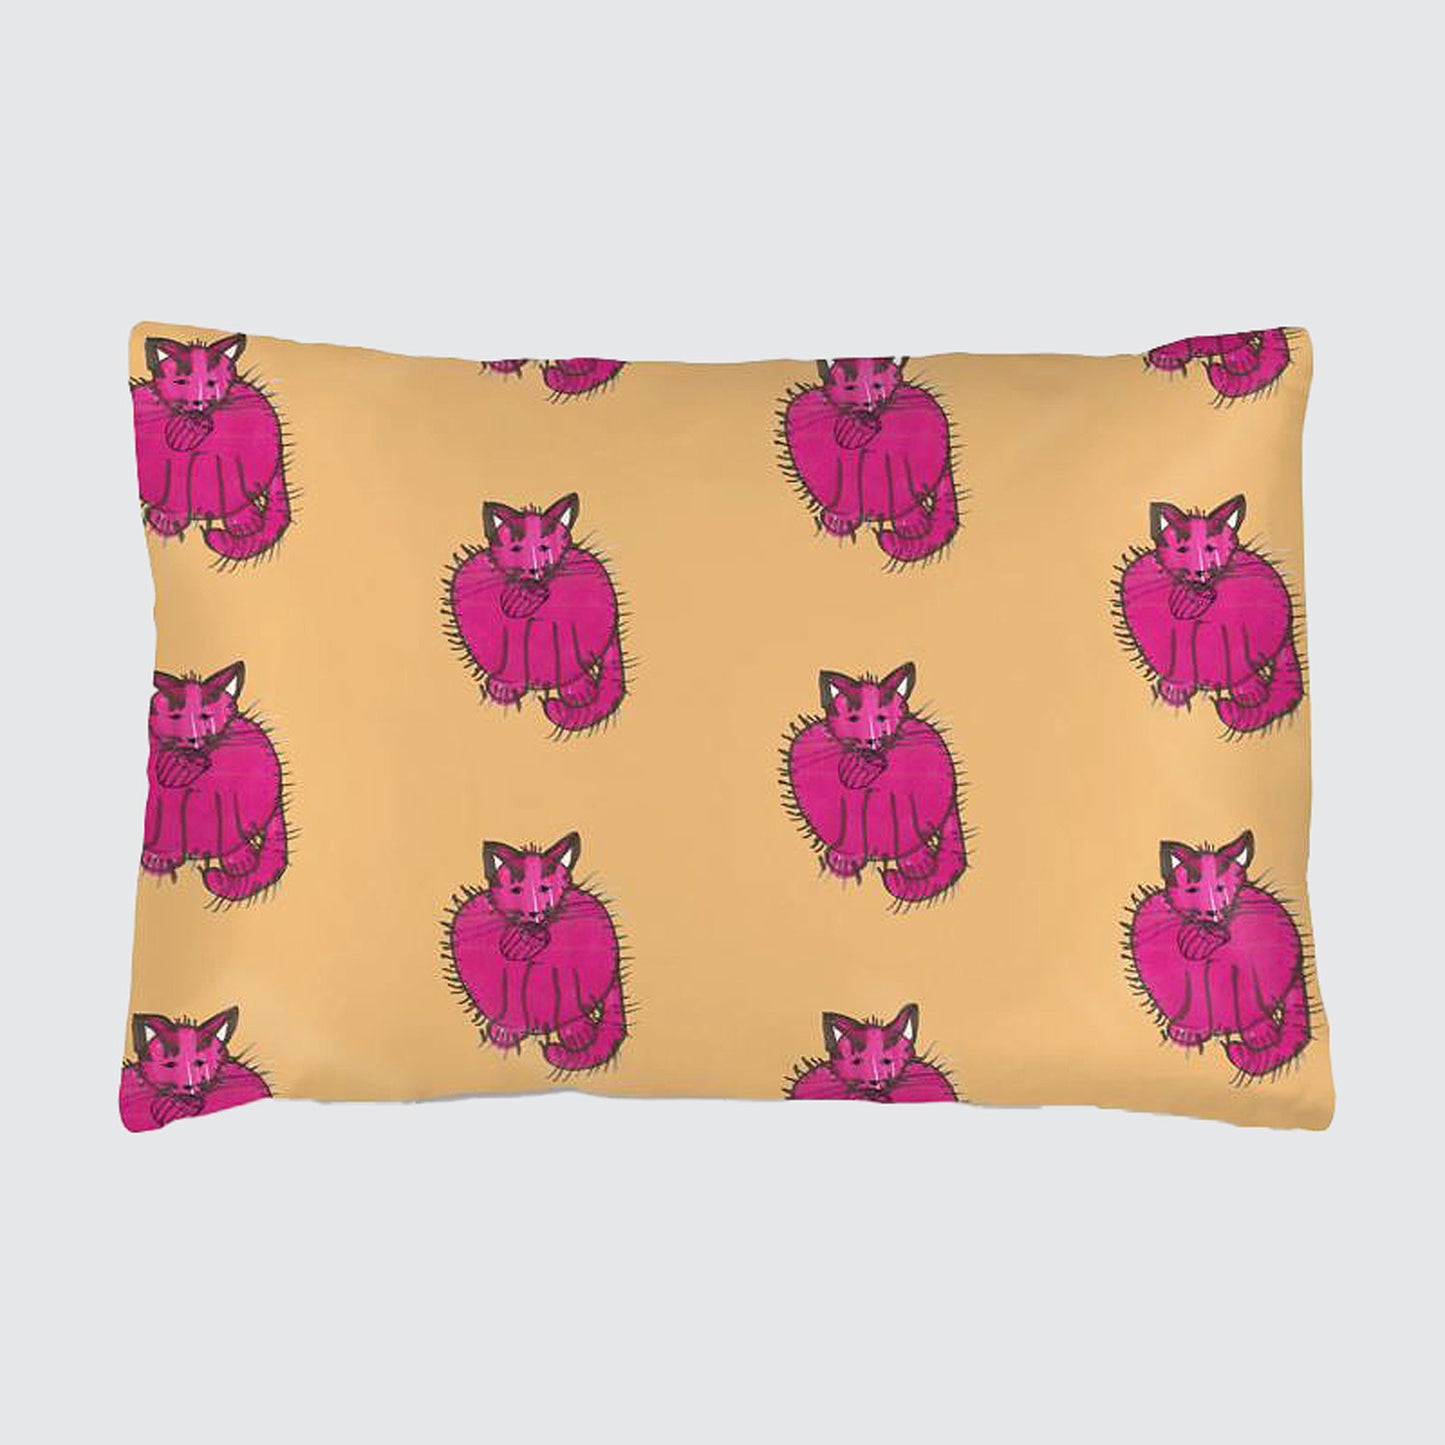 Silk Pillowcase For Children - Orange and Pink - Purry The Burry